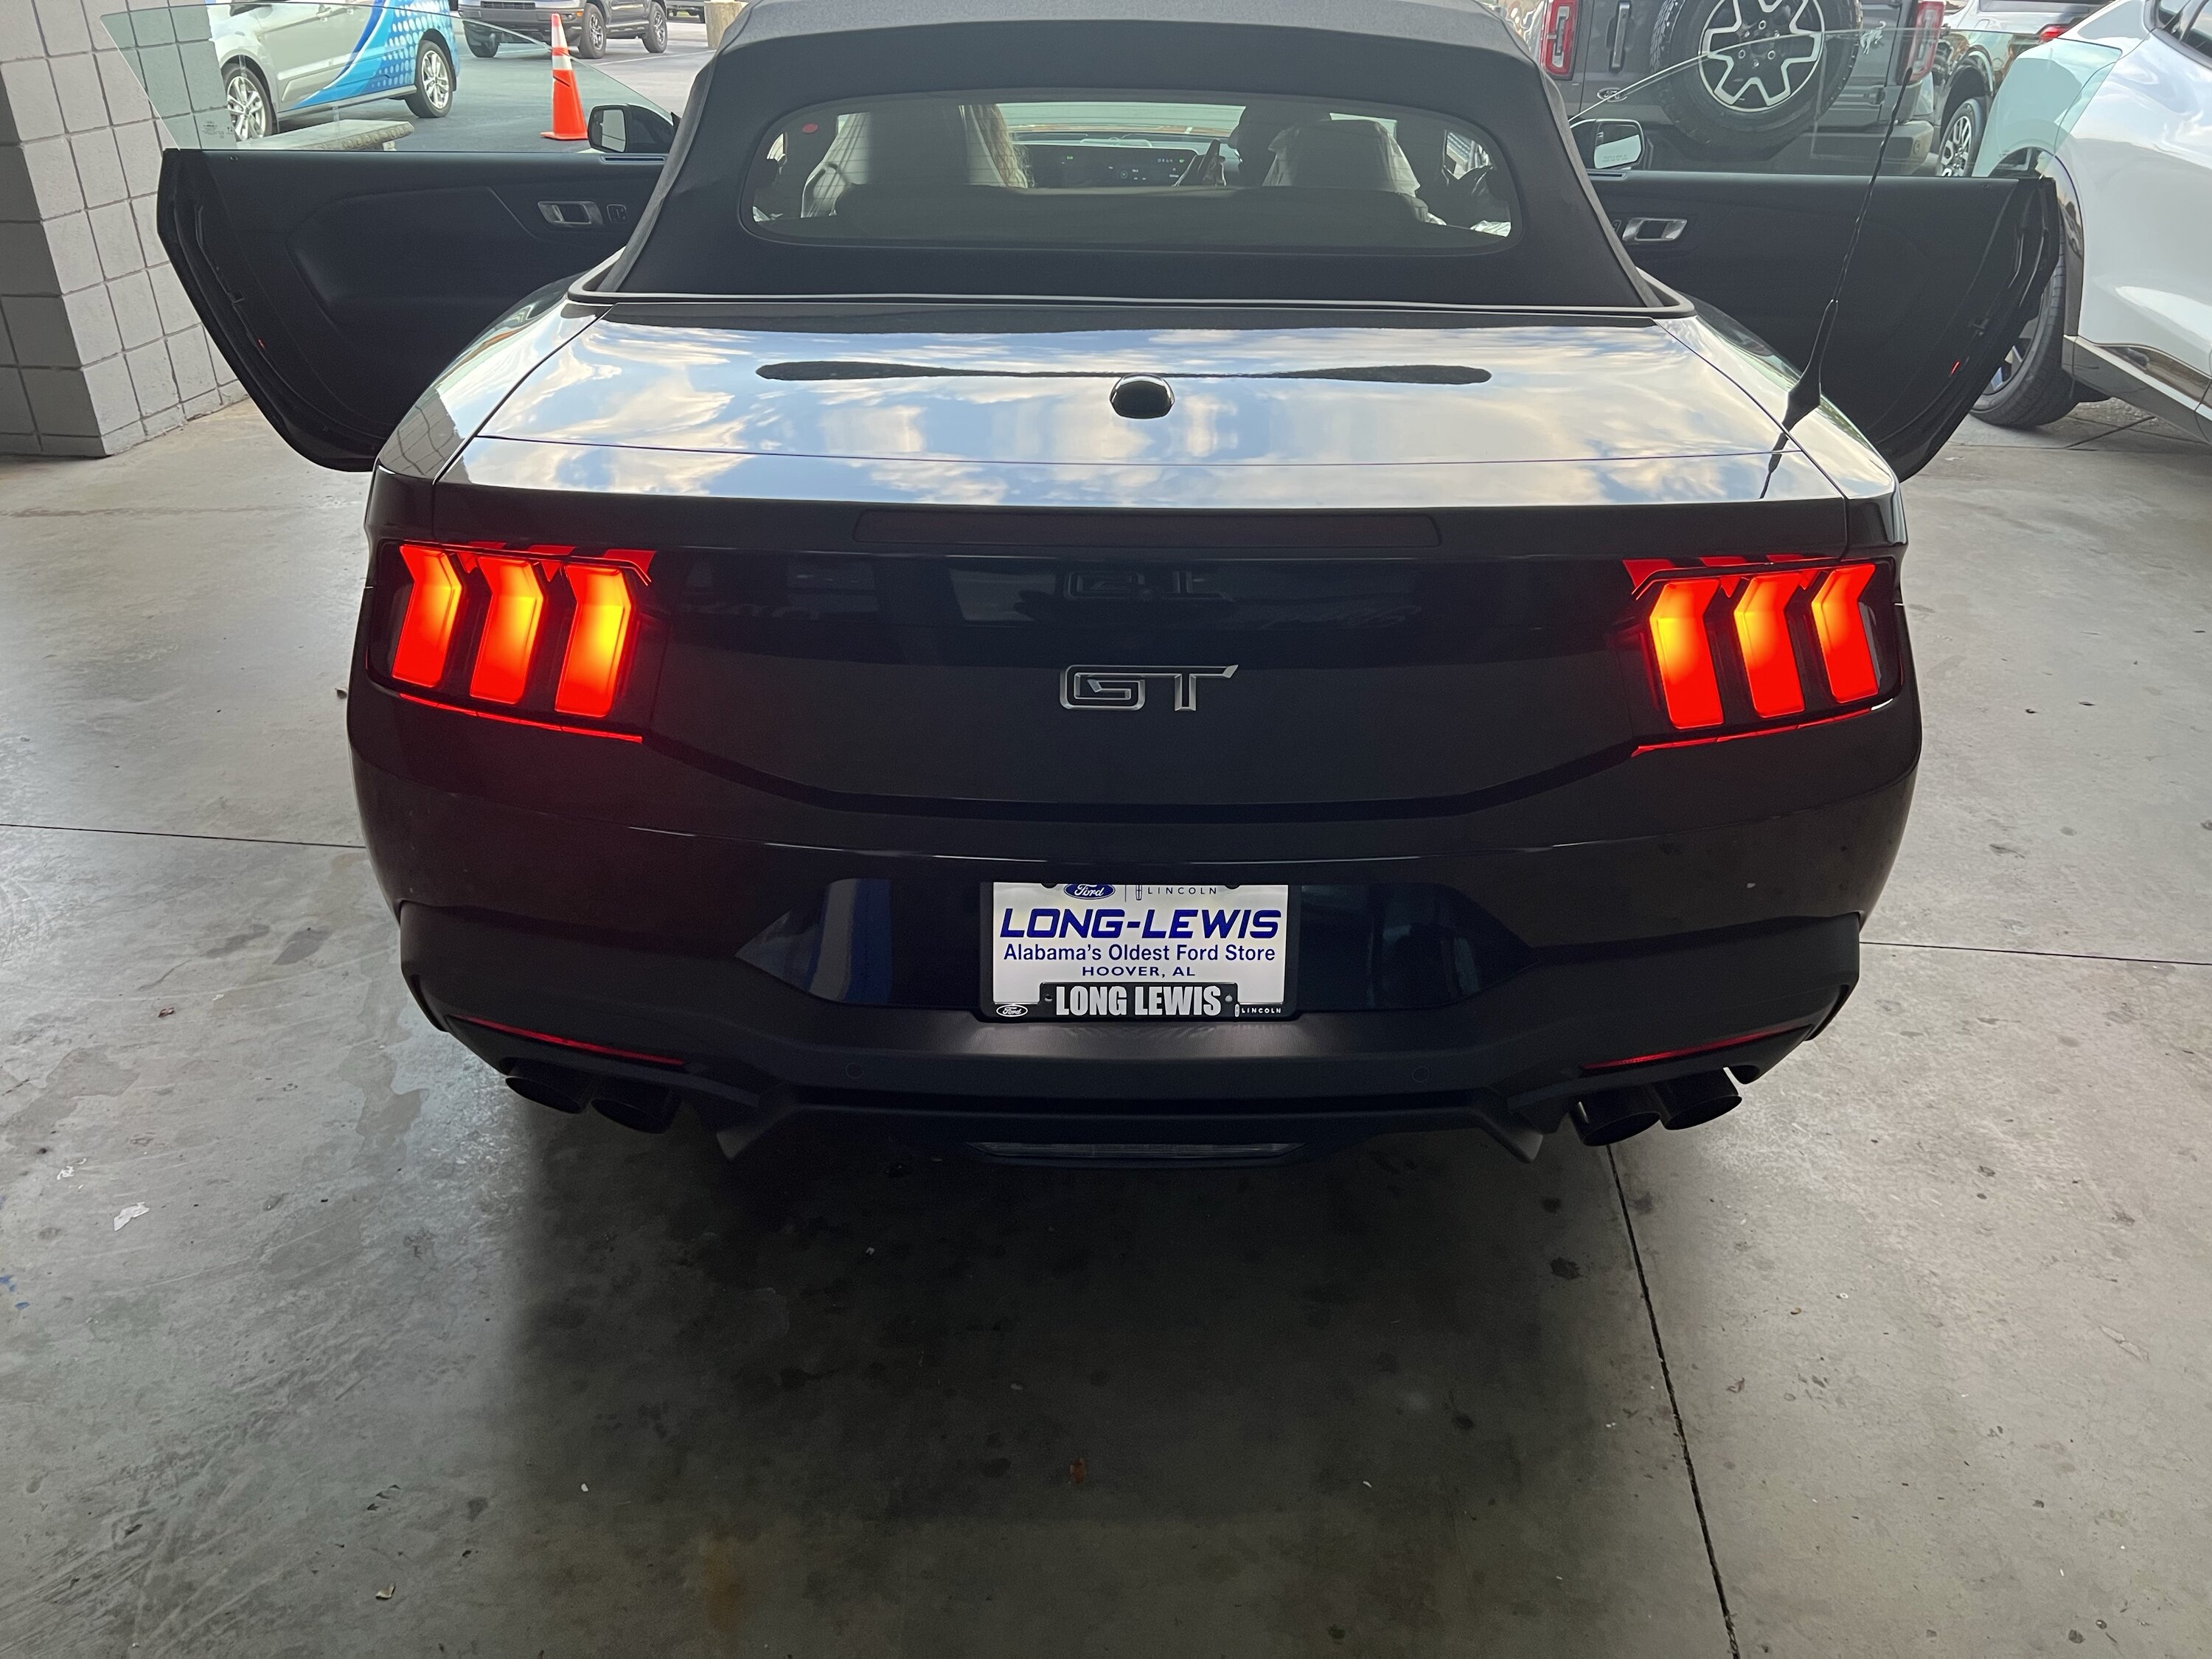 S650 Mustang Triple black GT convertible just arrived IMG_4851